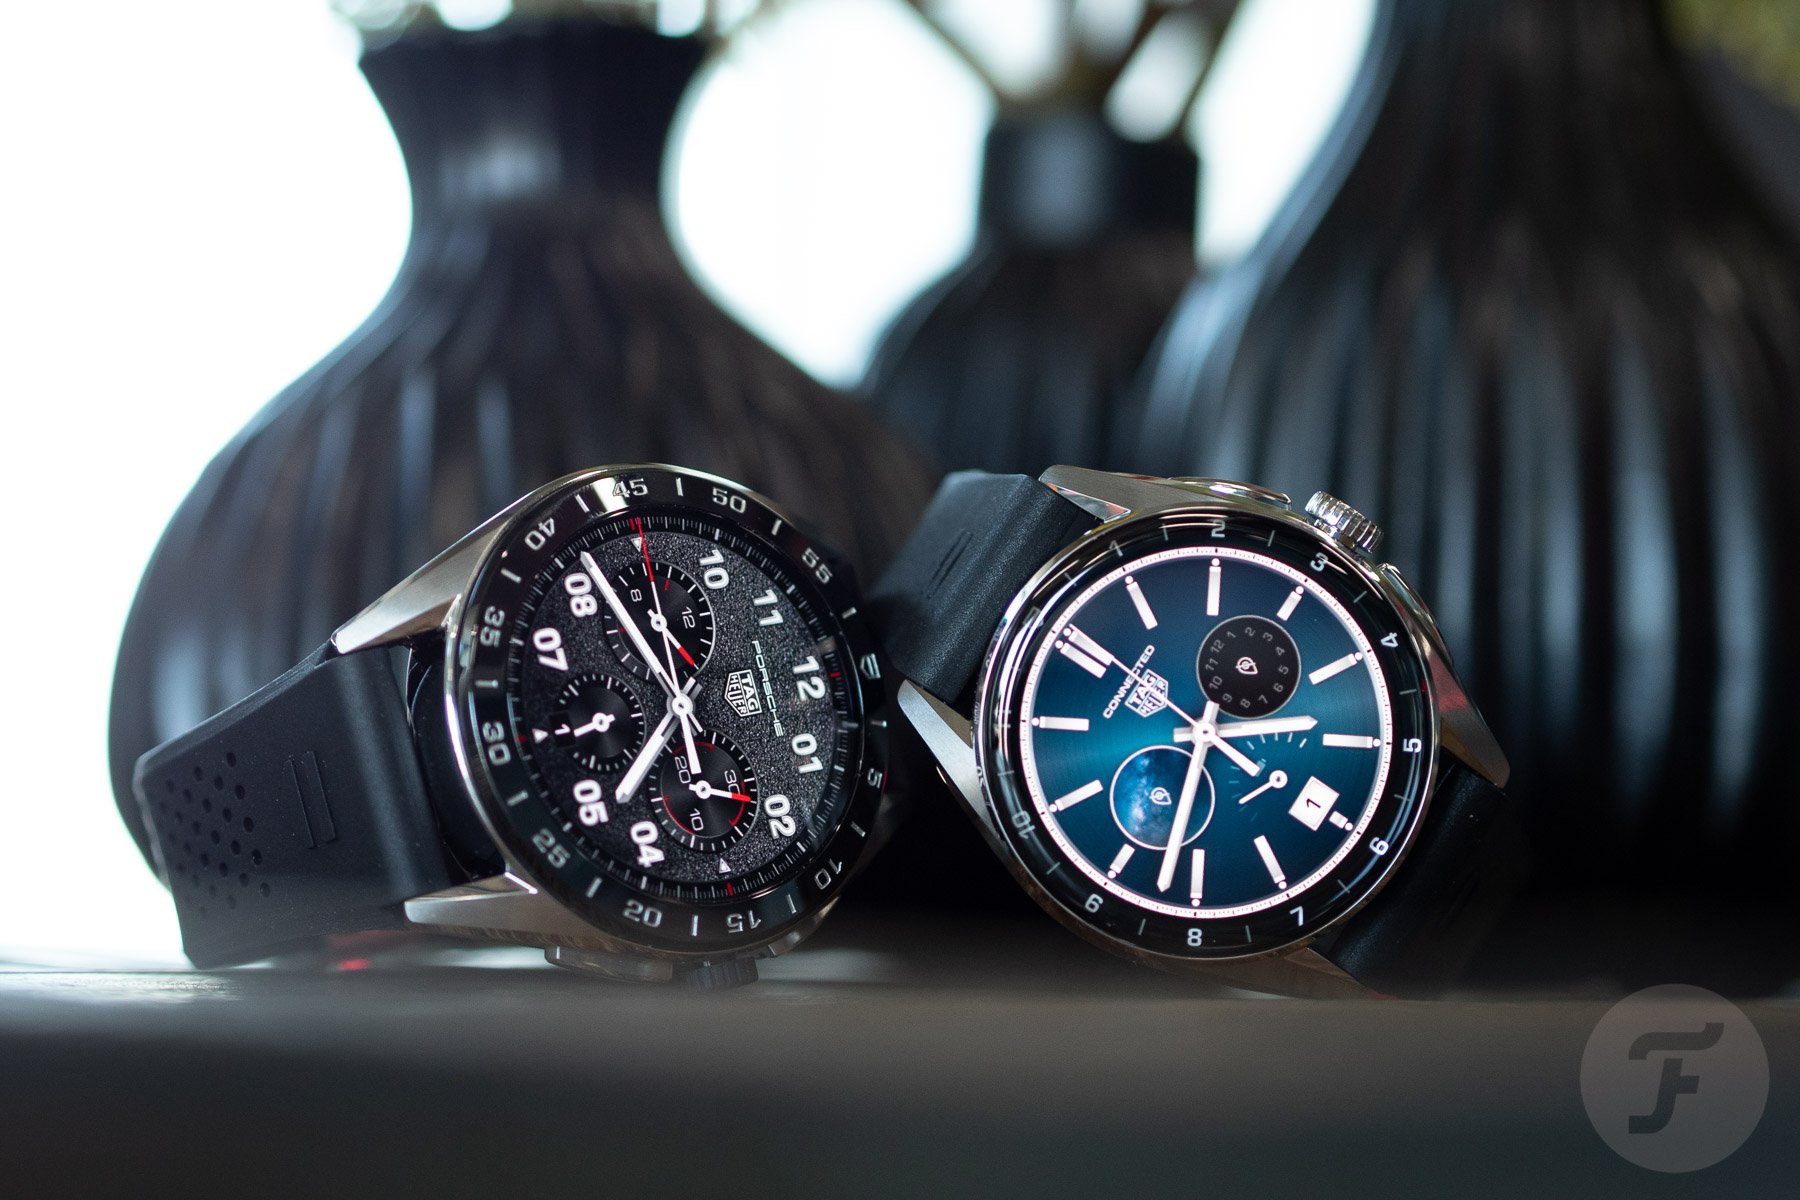 TAG Heuer's smaller luxury smartwatch will set you back $1,800